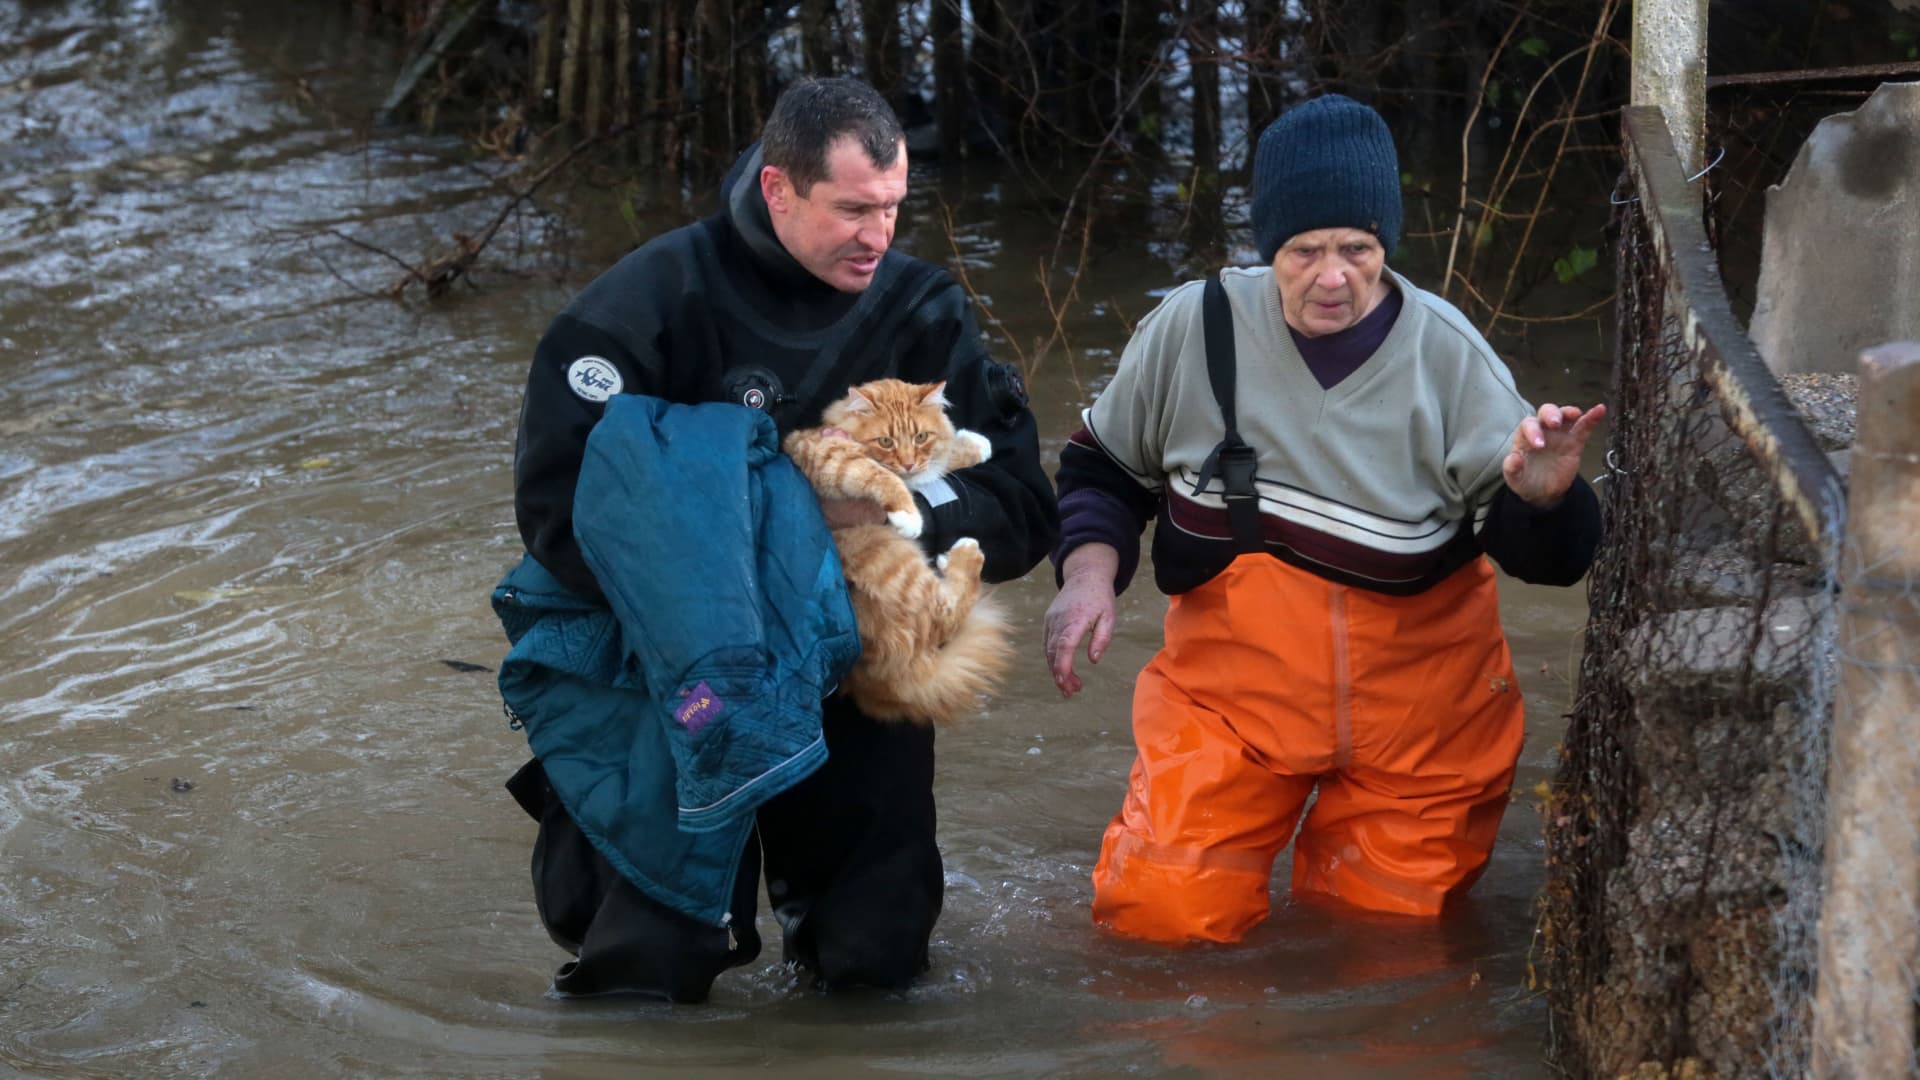 A rescuer carries a cat and helps a woman during an evacuation of residents of the flooded village of Pribrezhnoe in Crimea on November 27, 2023, following a storm. Over 400,000 people in Crimea were left without power on November 27, 2023 after hurricane force winds and heavy rains battered the Russian-annexed peninsula over the weekend. Wind speeds of more than 140 kilometres per hour (about 90 mph) were recorded during the storm, which triggered a state of emergency in some of the peninsula's municipalities. (Photo by STRINGER / AFP) (Photo by STRINGER/AFP via Getty Images)